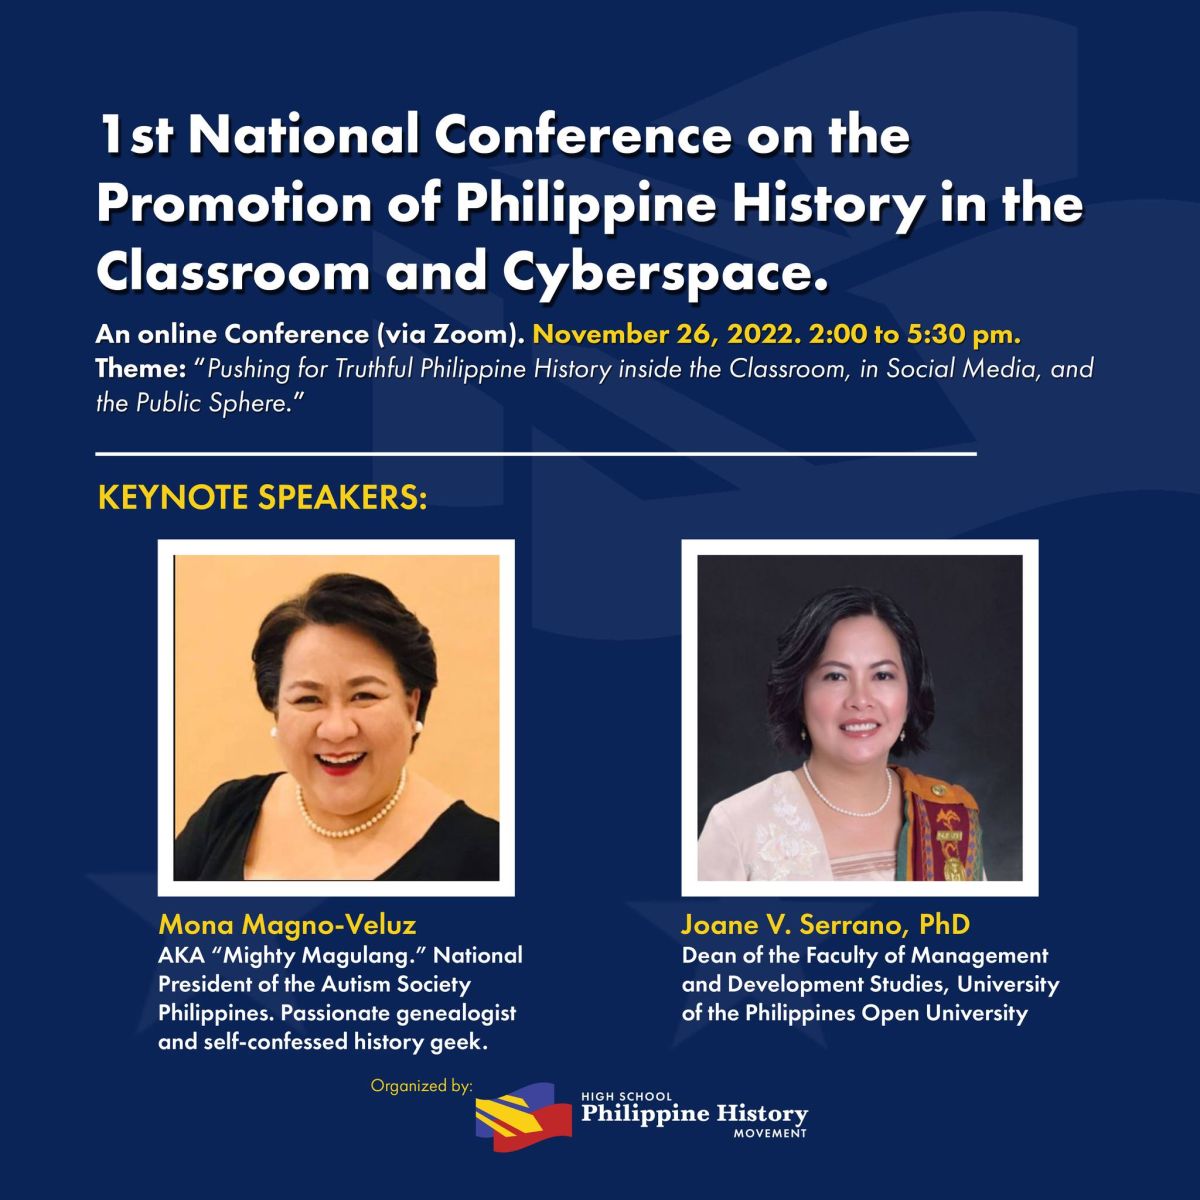 1st National Conference on the Promotion of Philippine History in the Classroom and Cyberspace